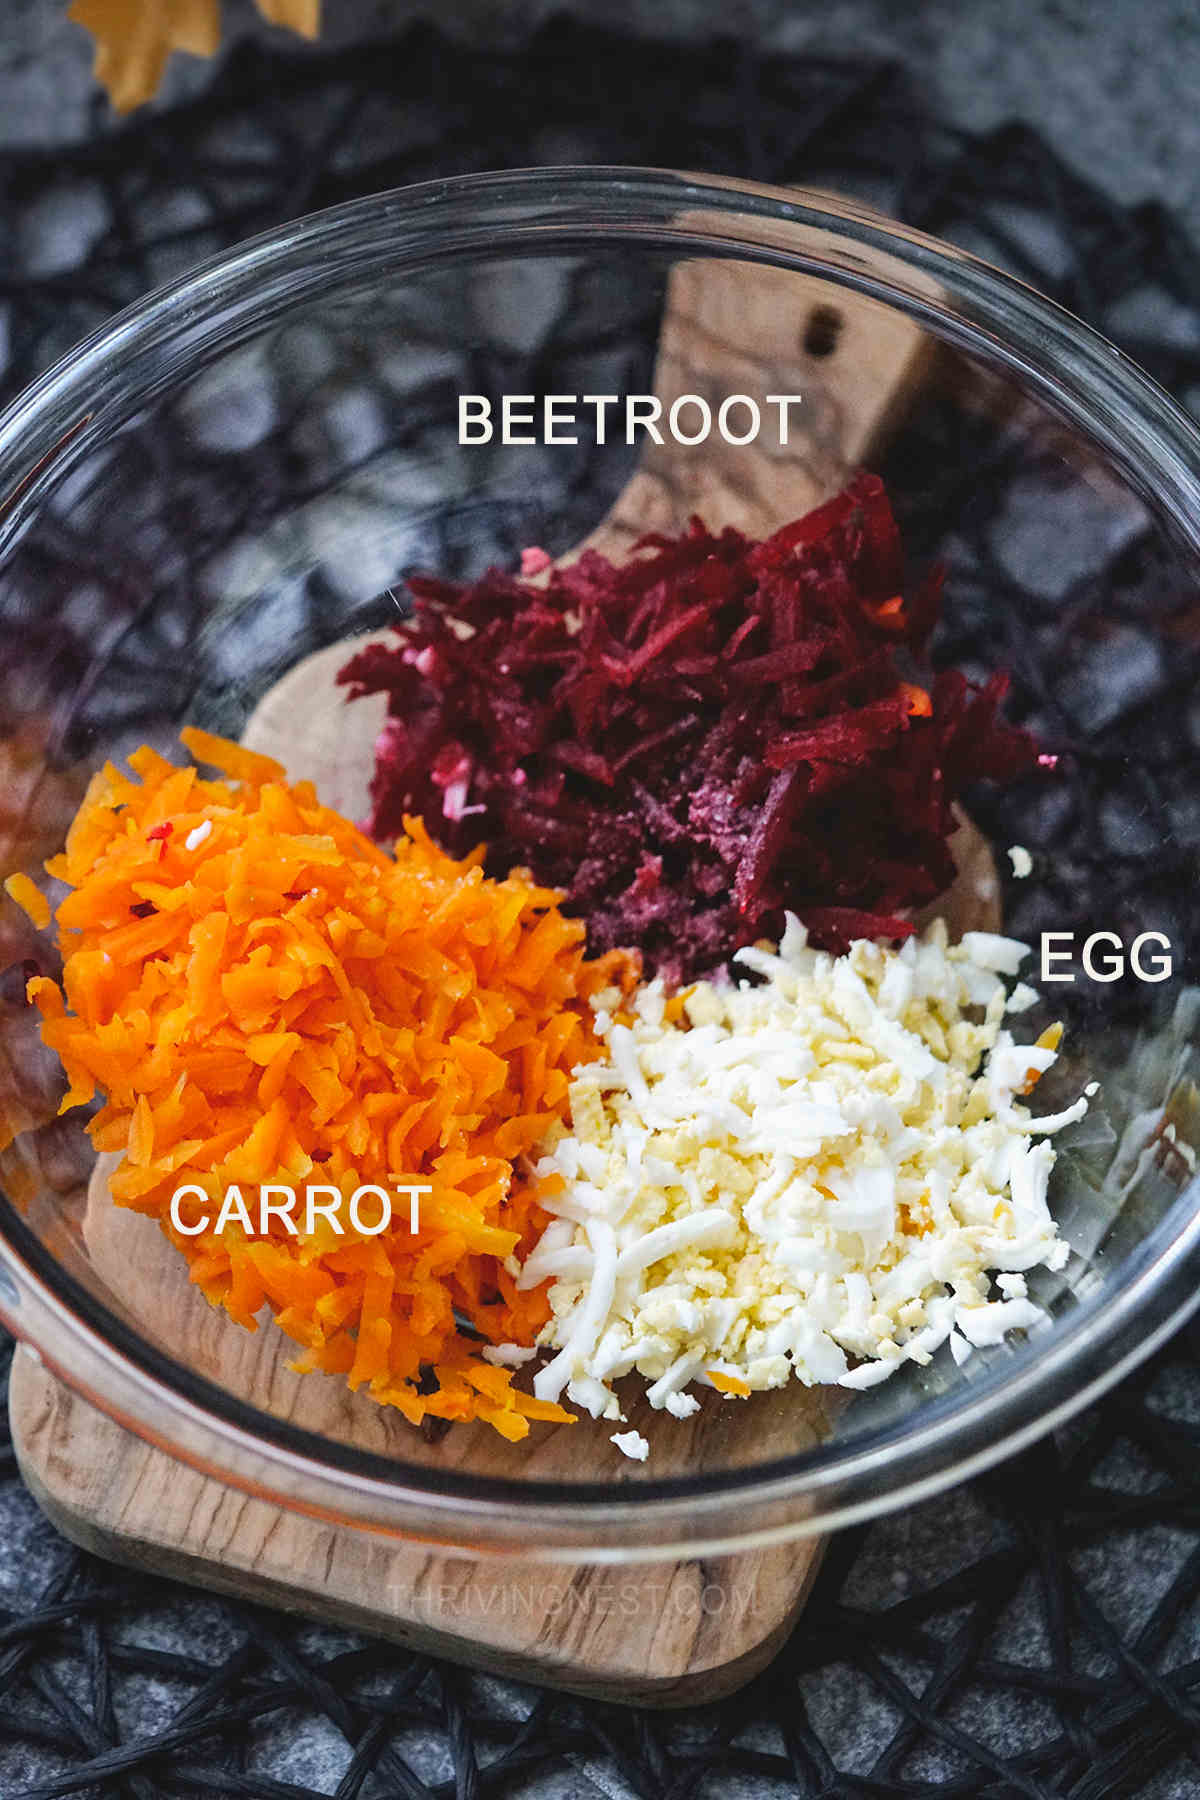 Ingredients for this salad grated and placed in a bowl: carrot, beet and egg.